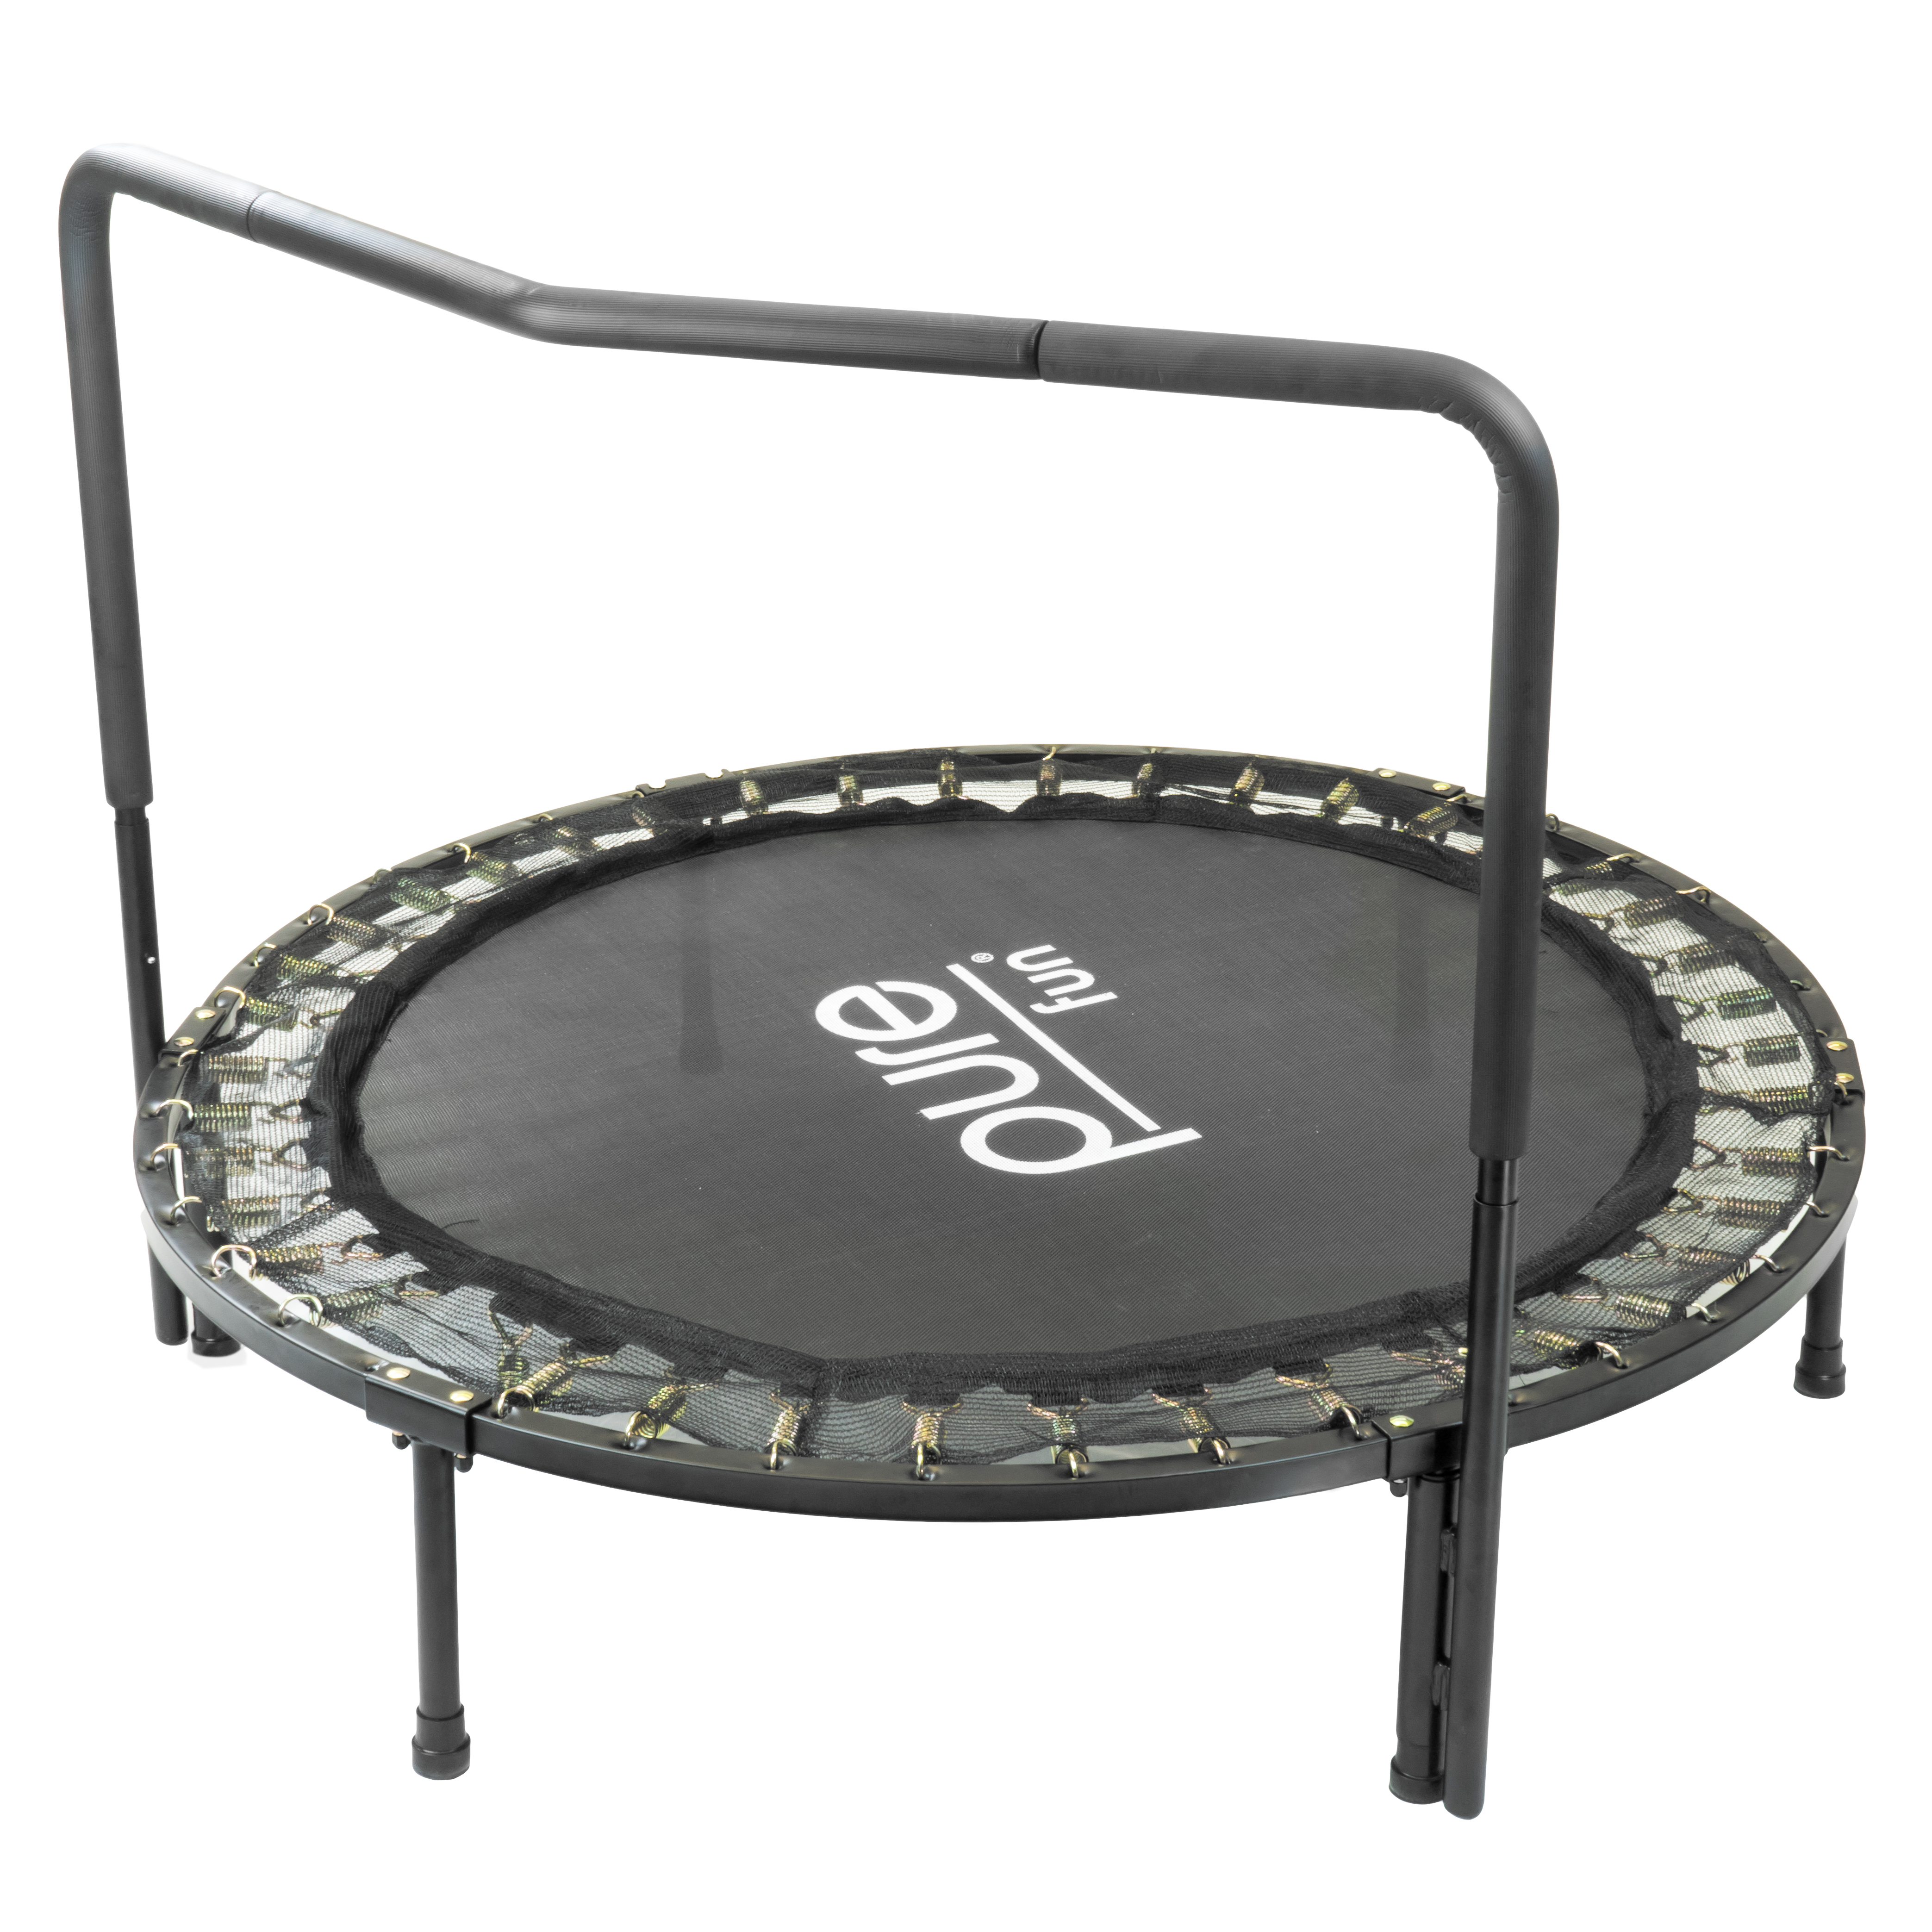 Pure Fun Super Jumper Kids 48-Inch Trampoline with Handrail, Pink, 100lb Weight Limit - image 4 of 6